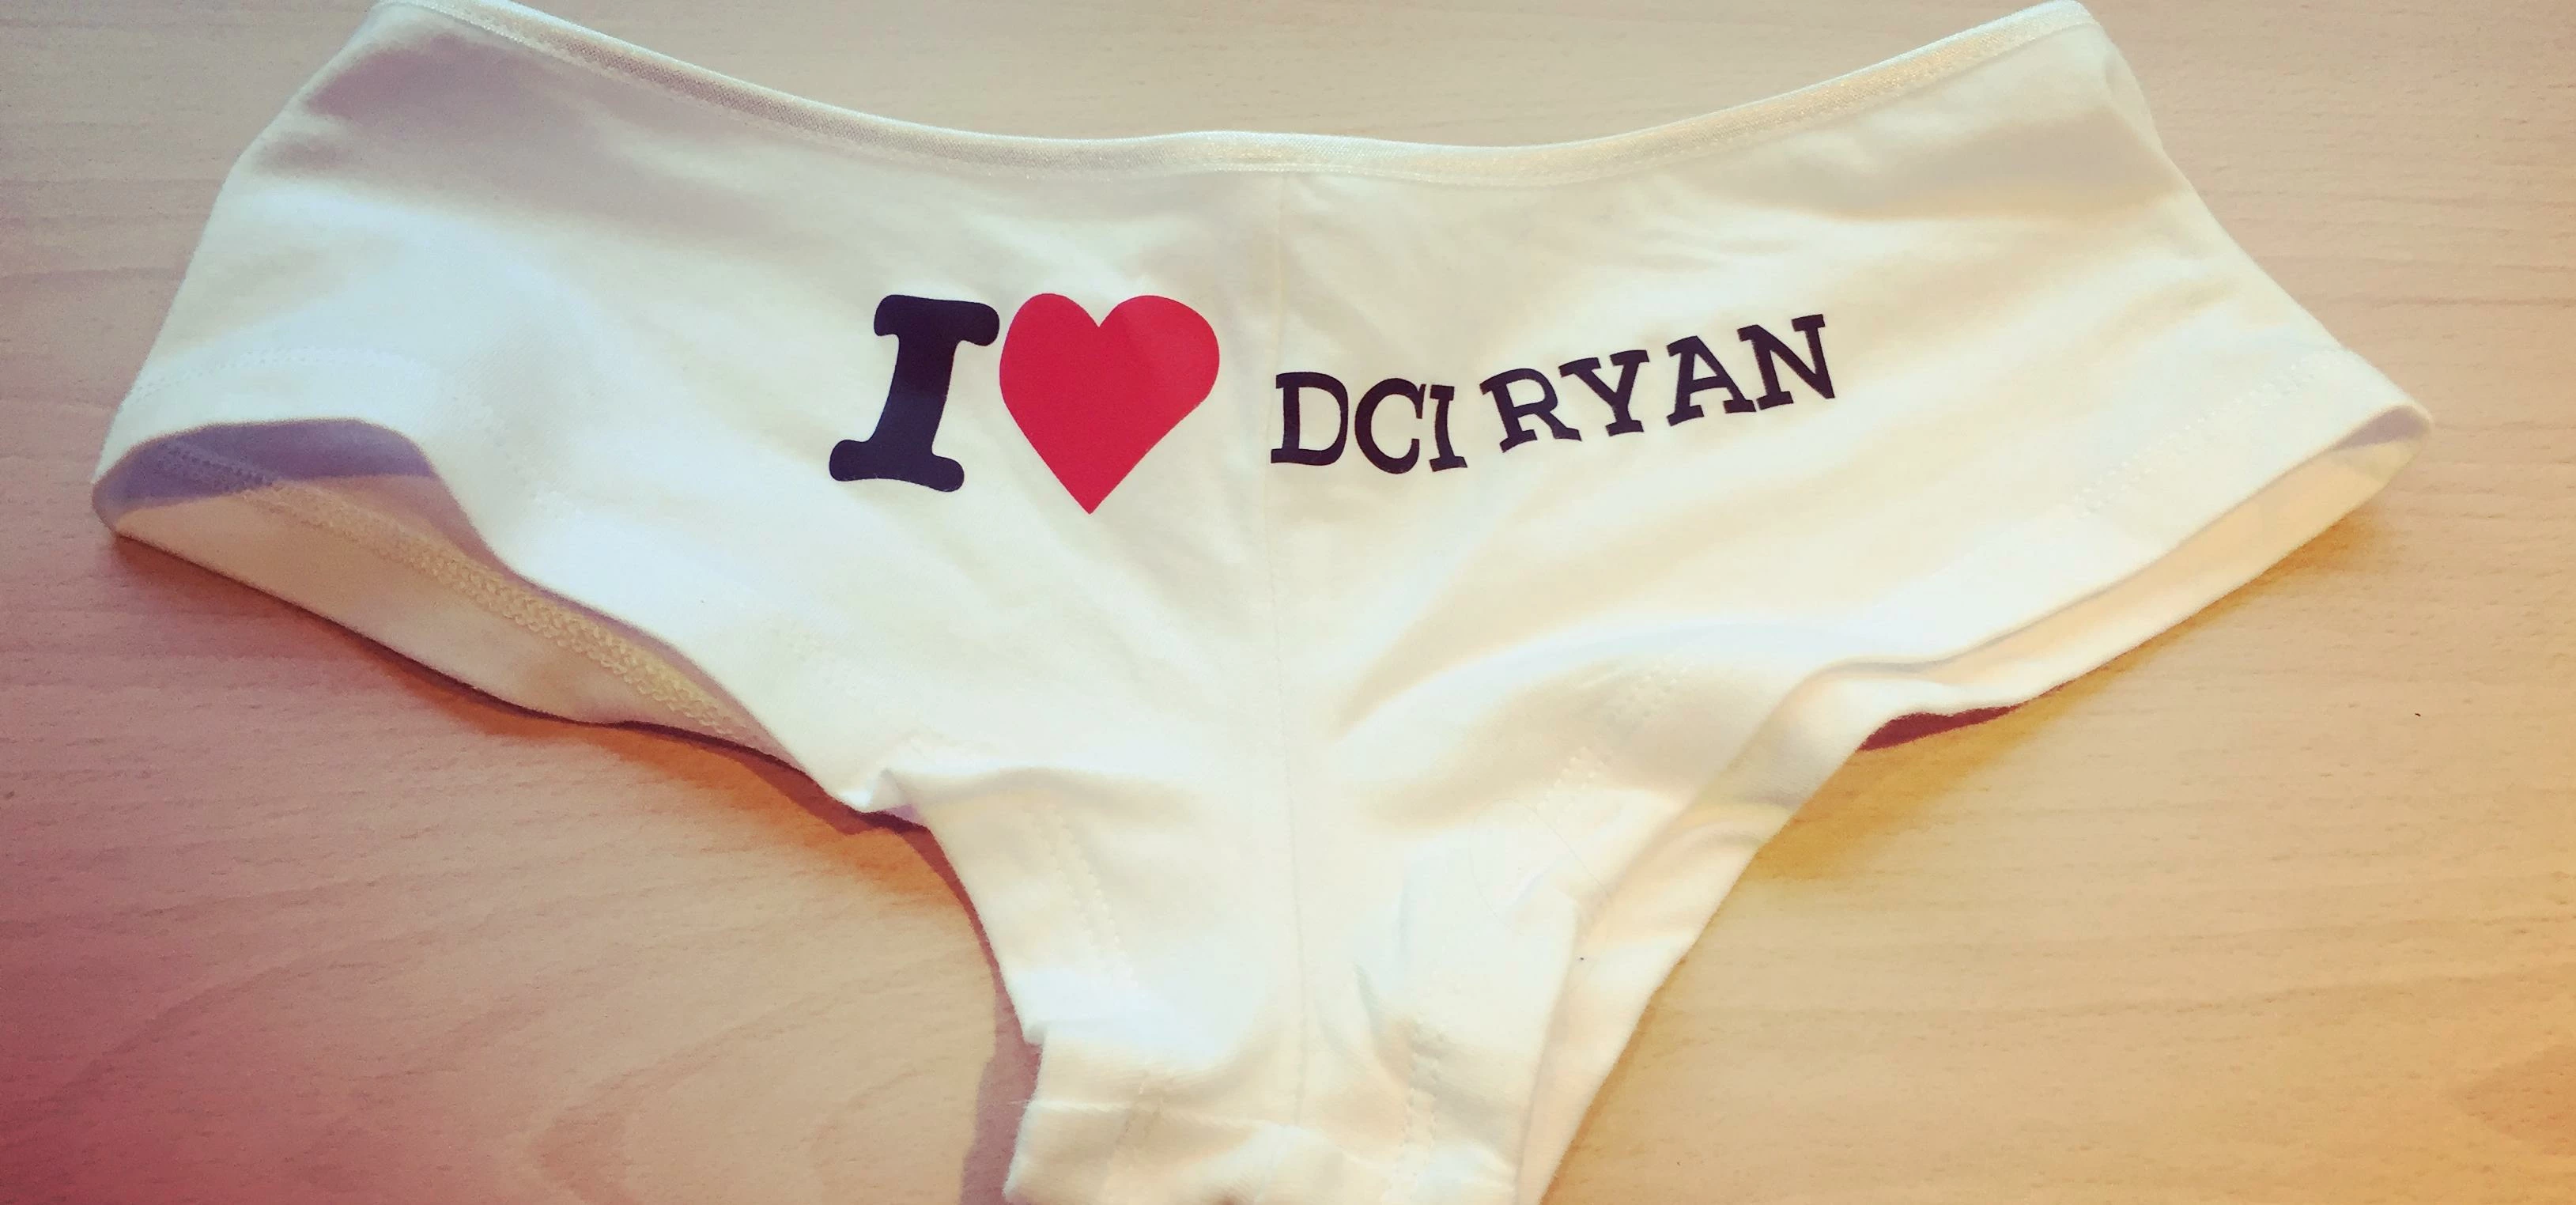 The specially made DCI Ryan knickers sent to author LJ Ross